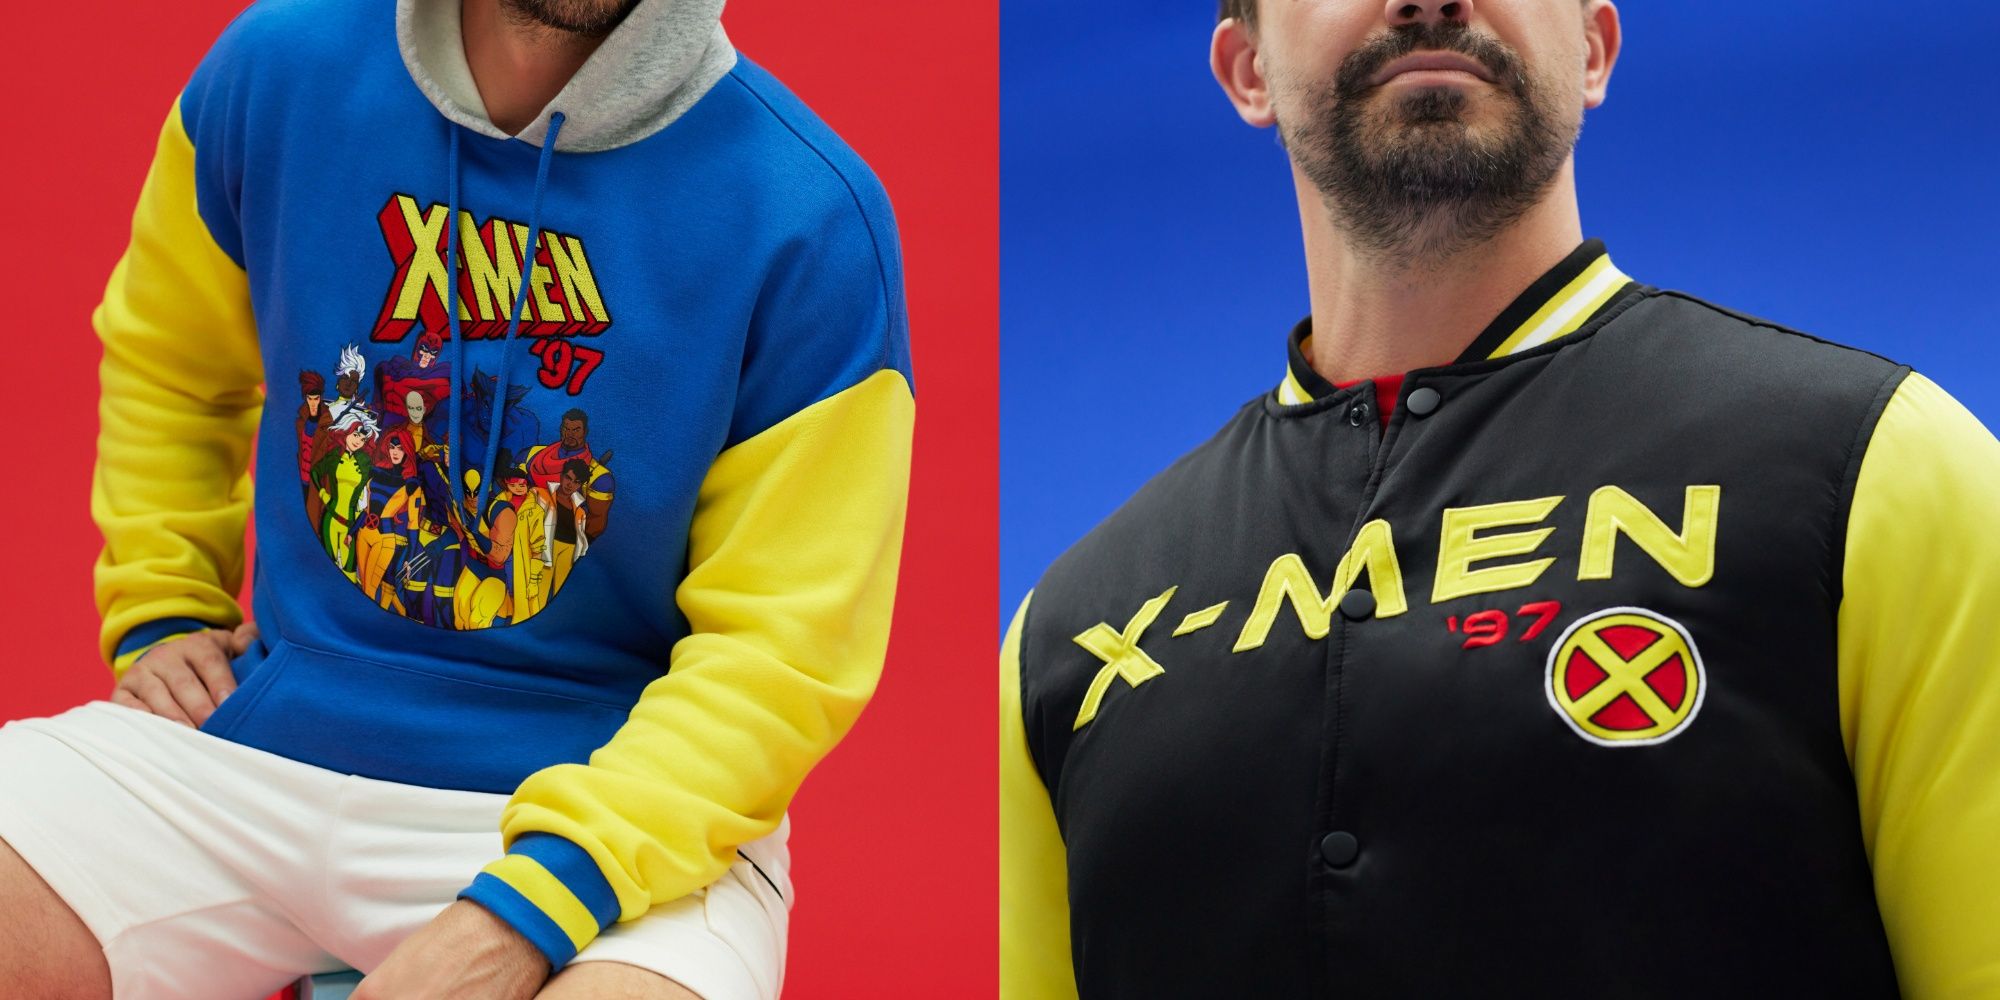 x-men '97 boxlunch hoodie and bomber jacket